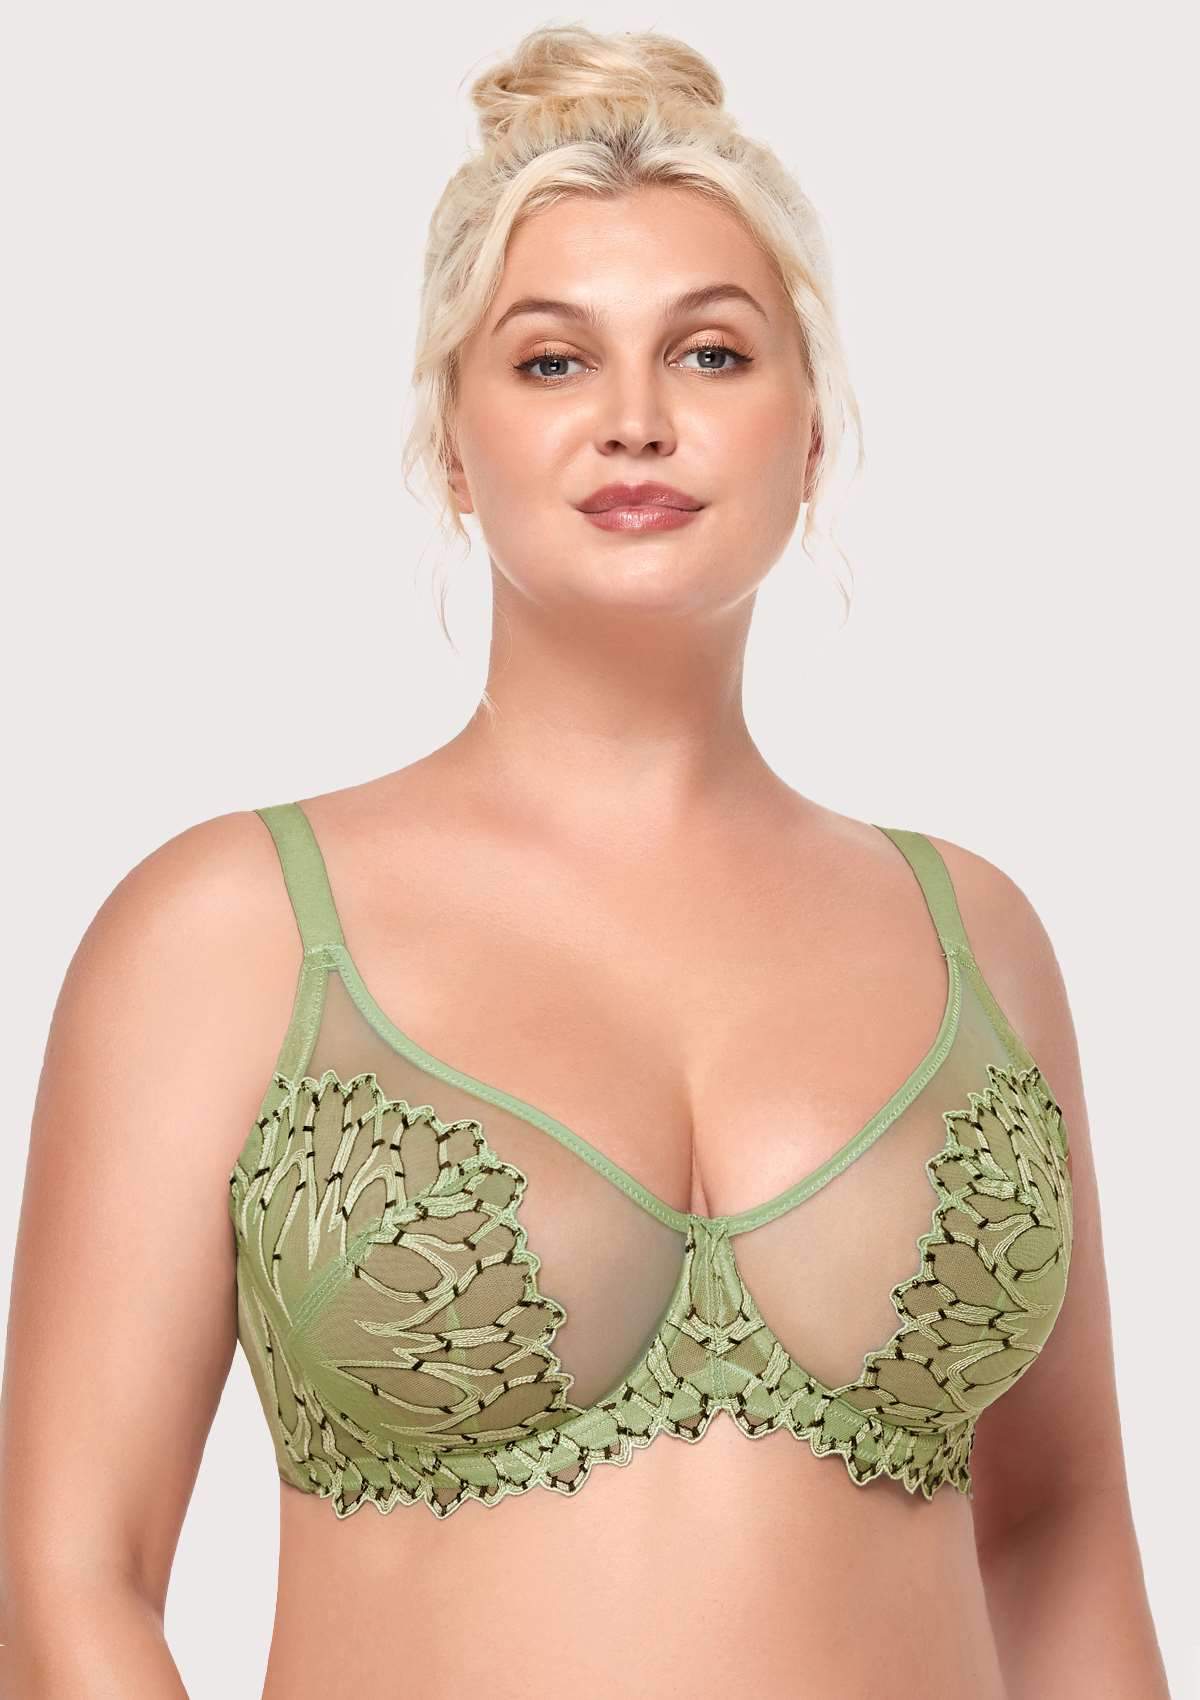 HSIA Chrysanthemum Floral Embroidered Bra: Lace Sheer Unpadded Bra - Green / 32 / C